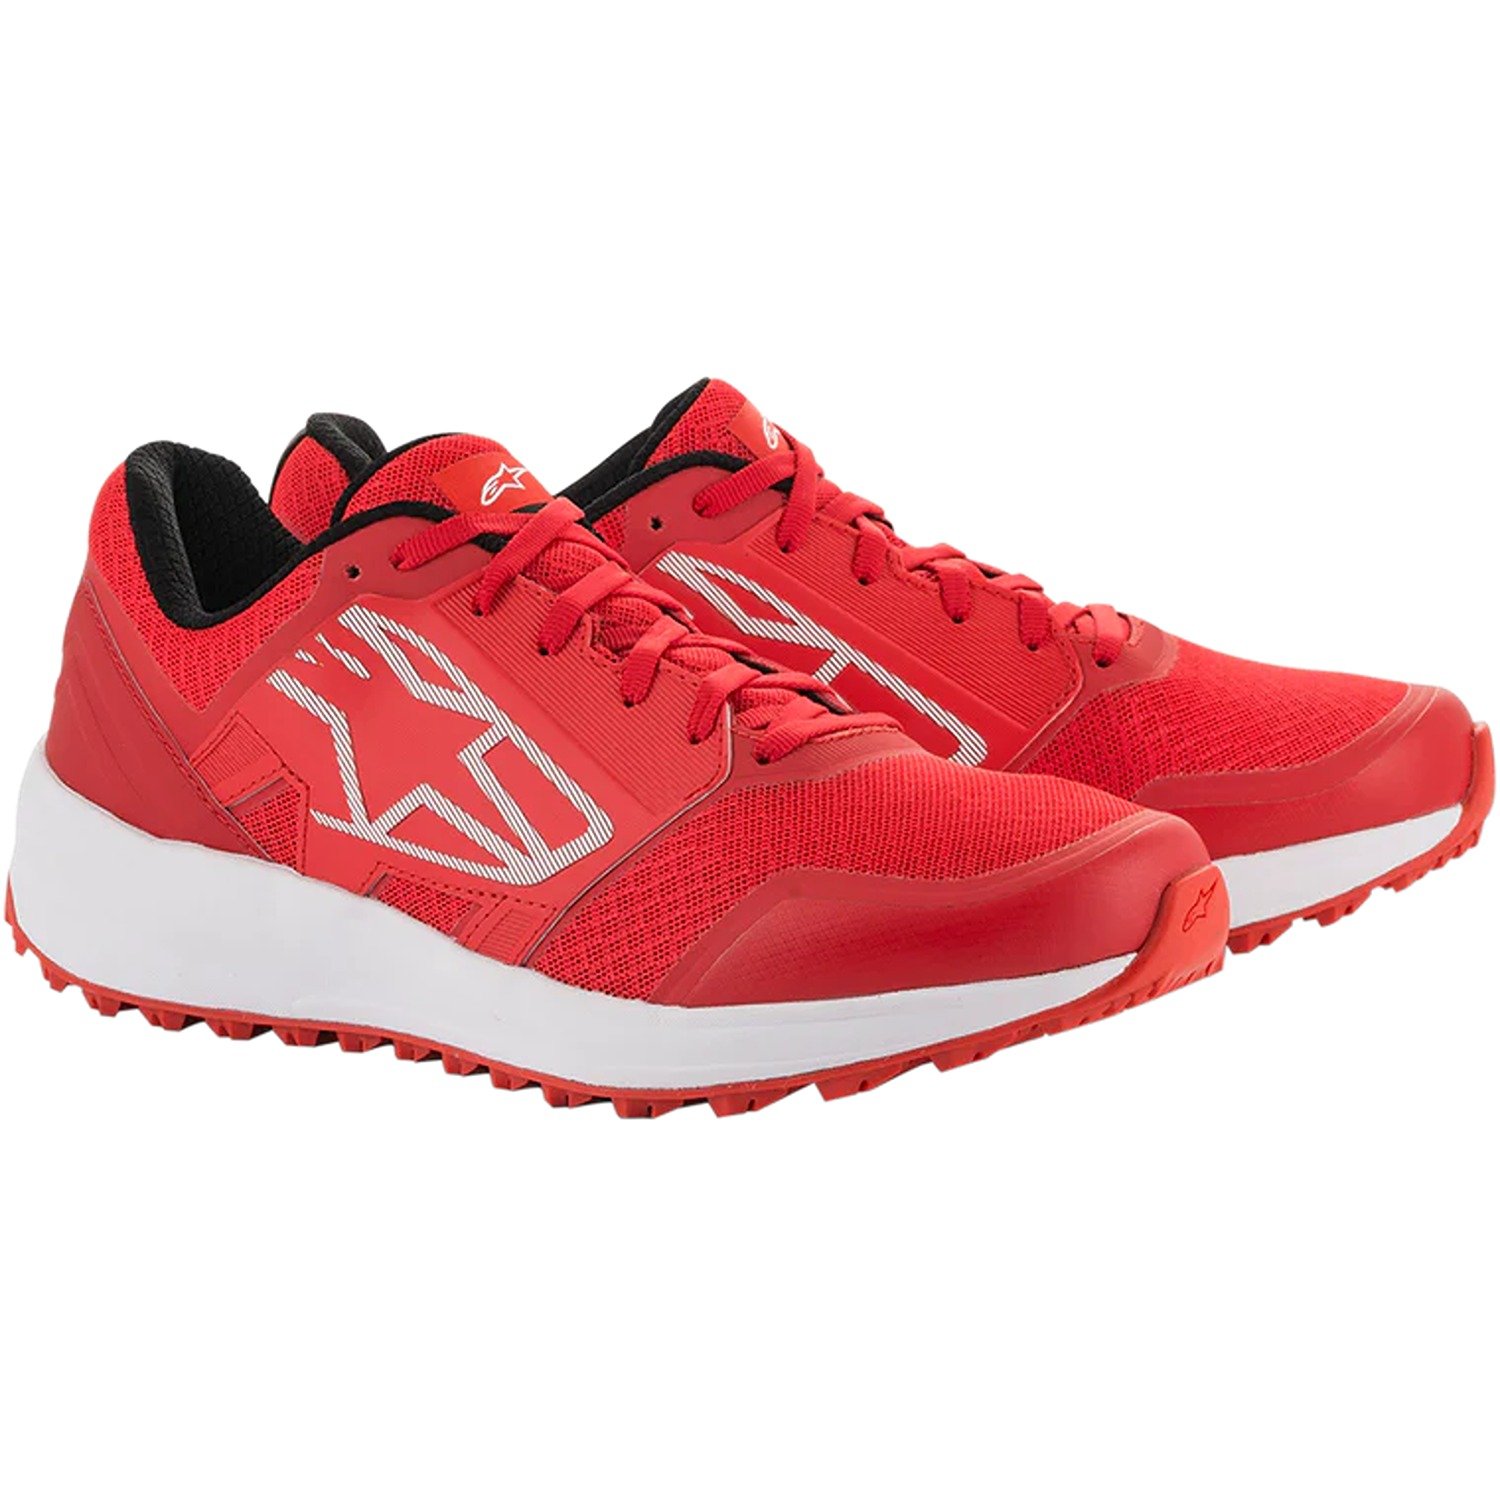 Image of Alpinestars Meta Trail Shoes Red White Taille US 65